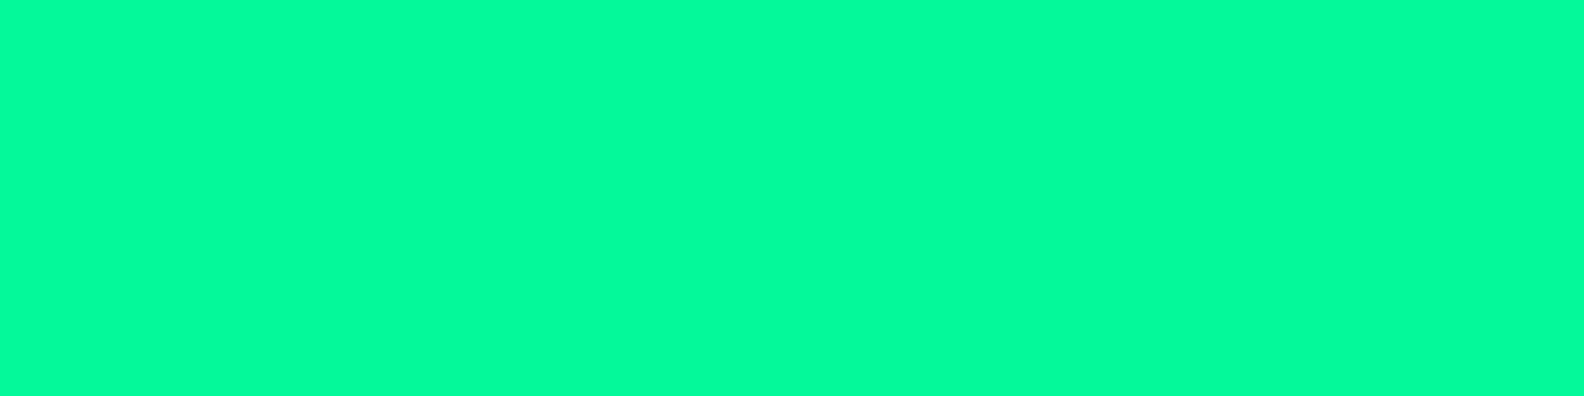 1584x396 Medium Spring Green Solid Color Background